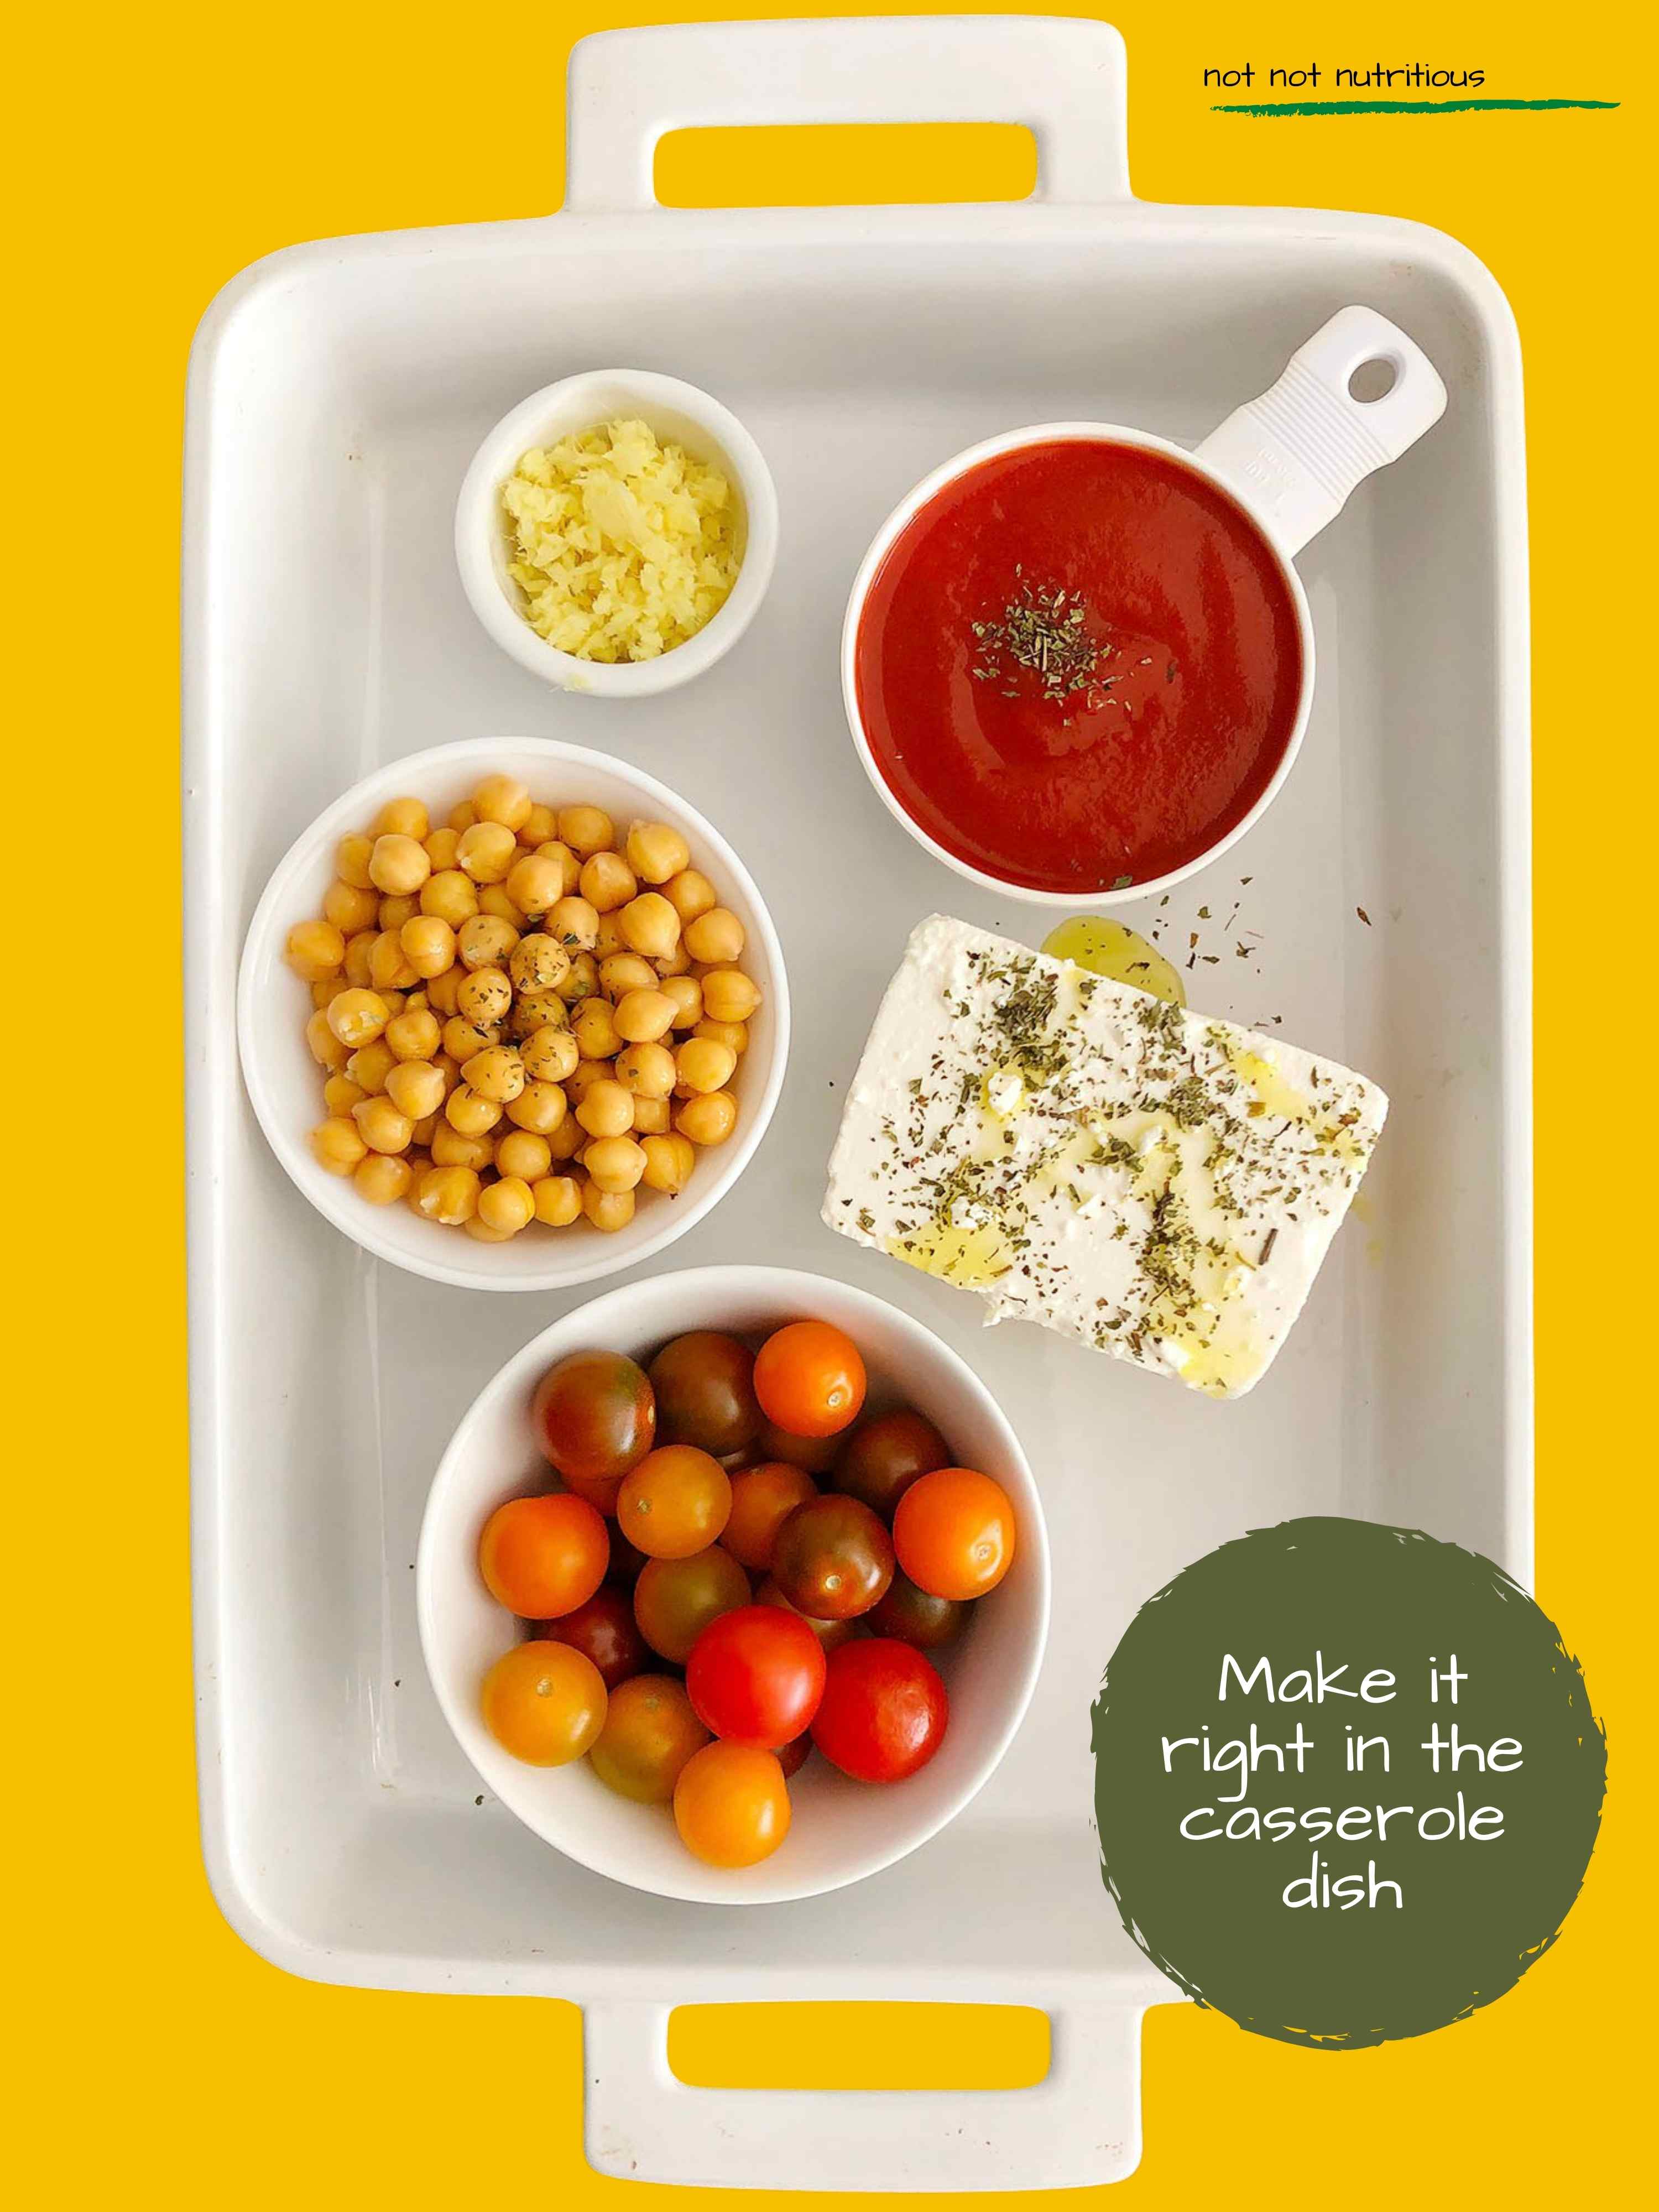 Top-down view of ingredients for Chickpea Feta Bake, assembled in a white casserole dish. From top right - tomato sauce, block of feta, tomatoes, chickpeas, minced ginger